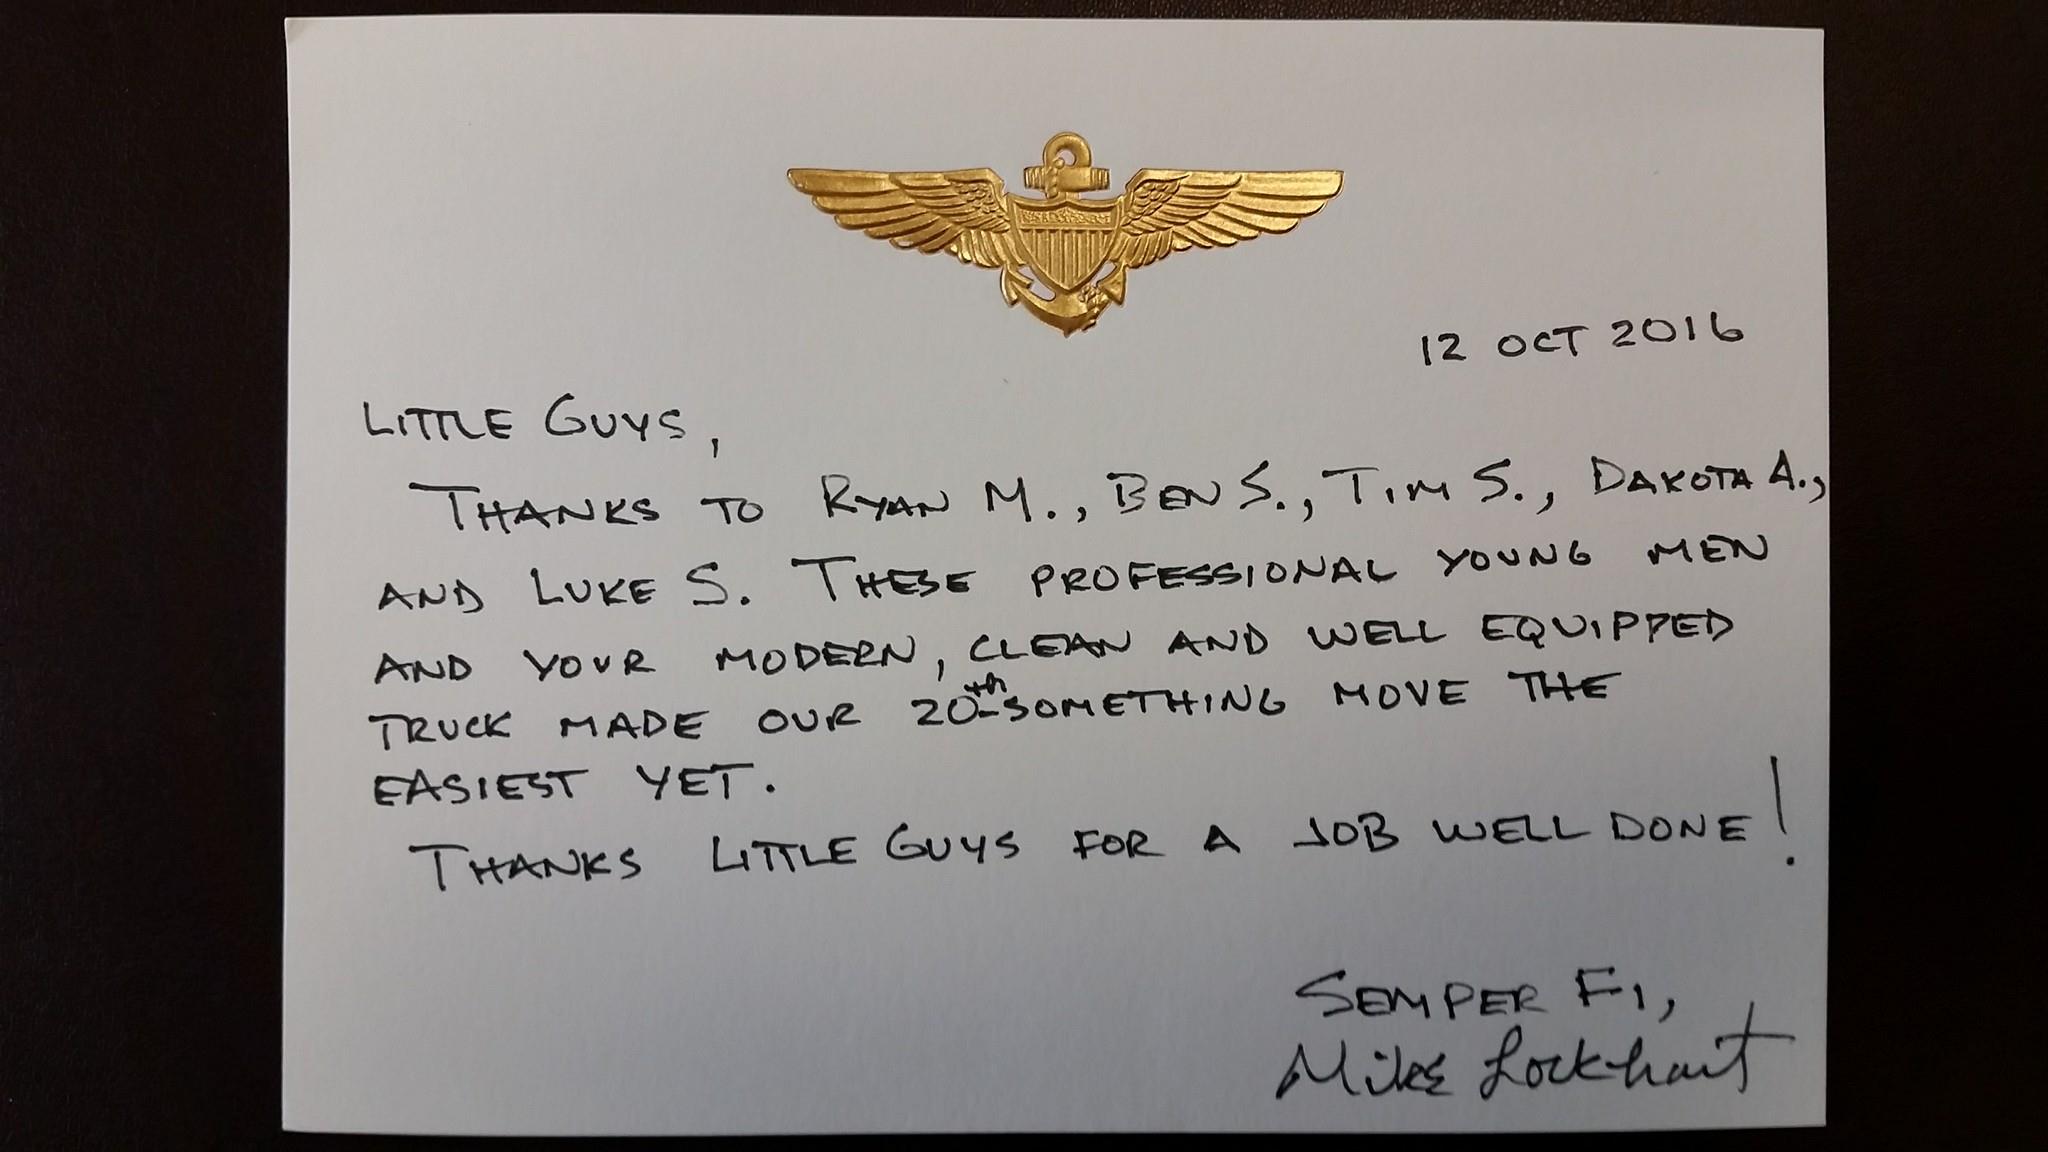 A handwritten note of appreciation from a customer brightens our day.